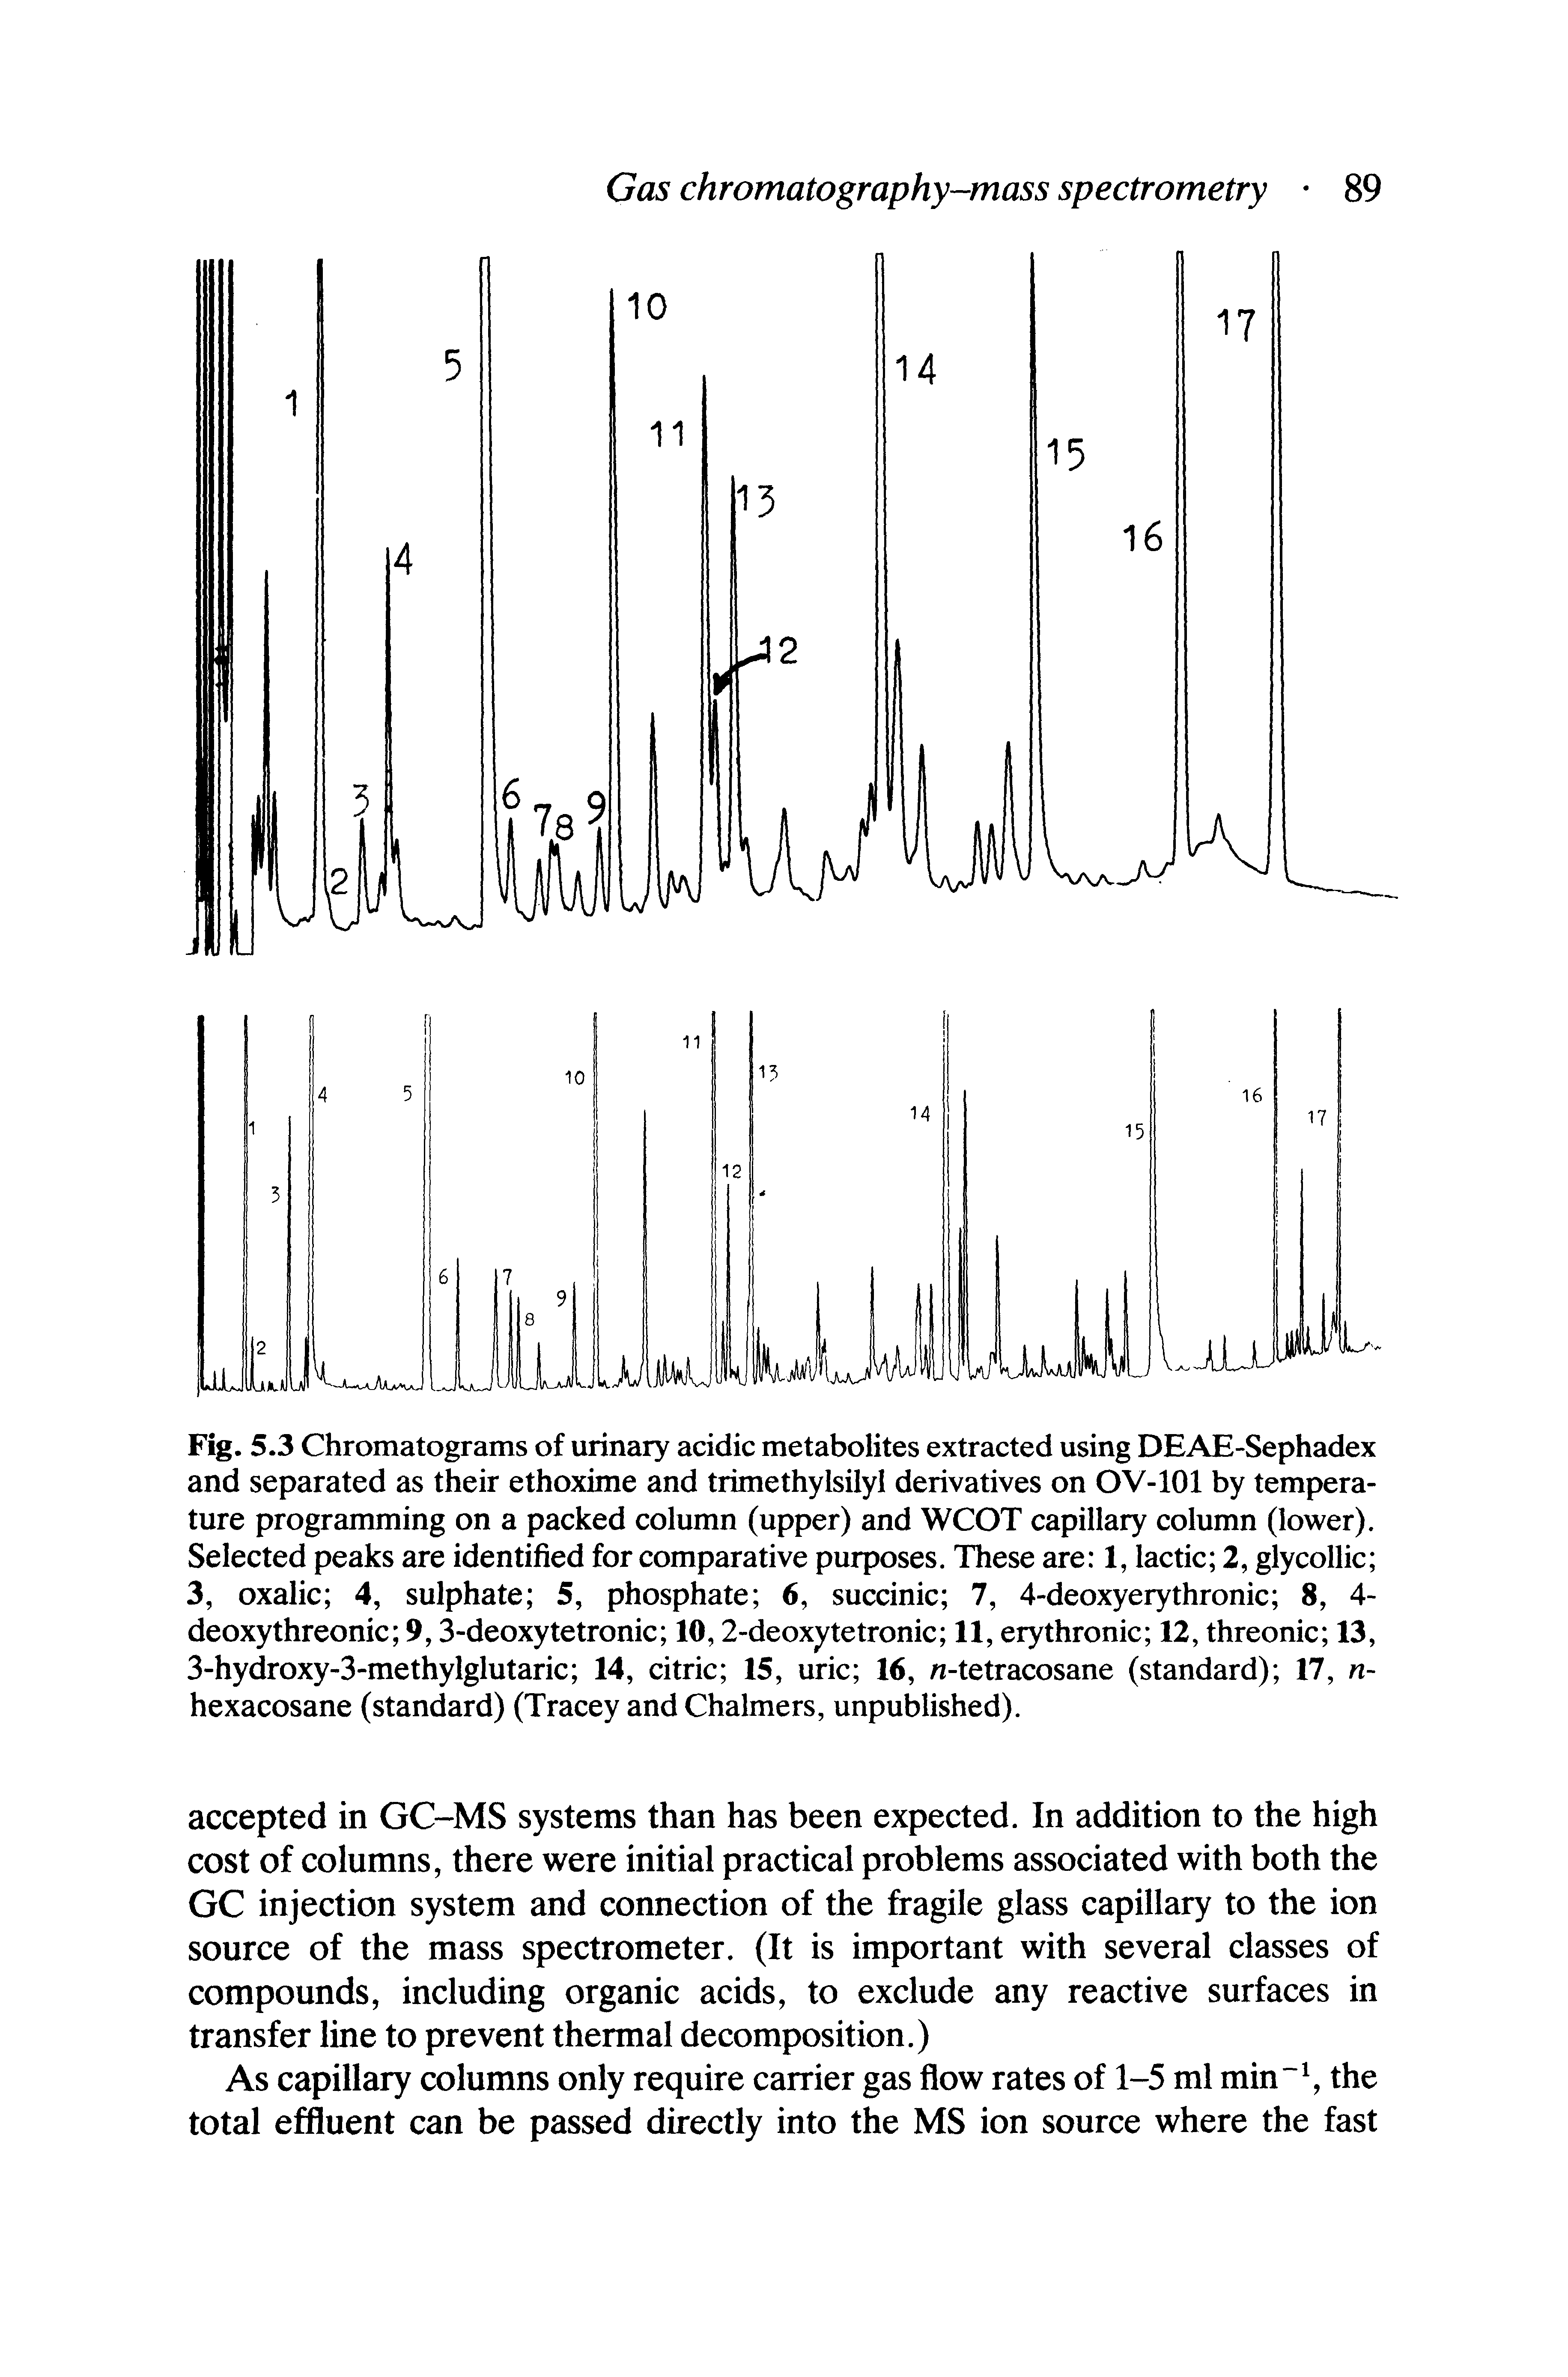 Fig. 5.3 Chromatograms of urinary acidic metabolites extracted using DEAE-Sephadex and separated as their ethoxime and trimethylsilyl derivatives on OV-101 by temperature programming on a packed column (upper) and WCOT capillary column (lower). Selected peaks are identified for comparative purposes. These are 1, lactic 2, glycollic 3, oxalic 4, sulphate 5, phosphate 6, succinic 7, 4-deoxyerythronic 8, 4-deoxythreonic 9,3-deoxytetronic 10,2-deoxytetronic 11, erythronic 12, threonic 13, 3-hydroxy-3-methylglutaric 14, citric 15, uric 16, n-tetracosane (standard) 17, n-hexacosane (standard) (Tracey and Chalmers, unpublished).